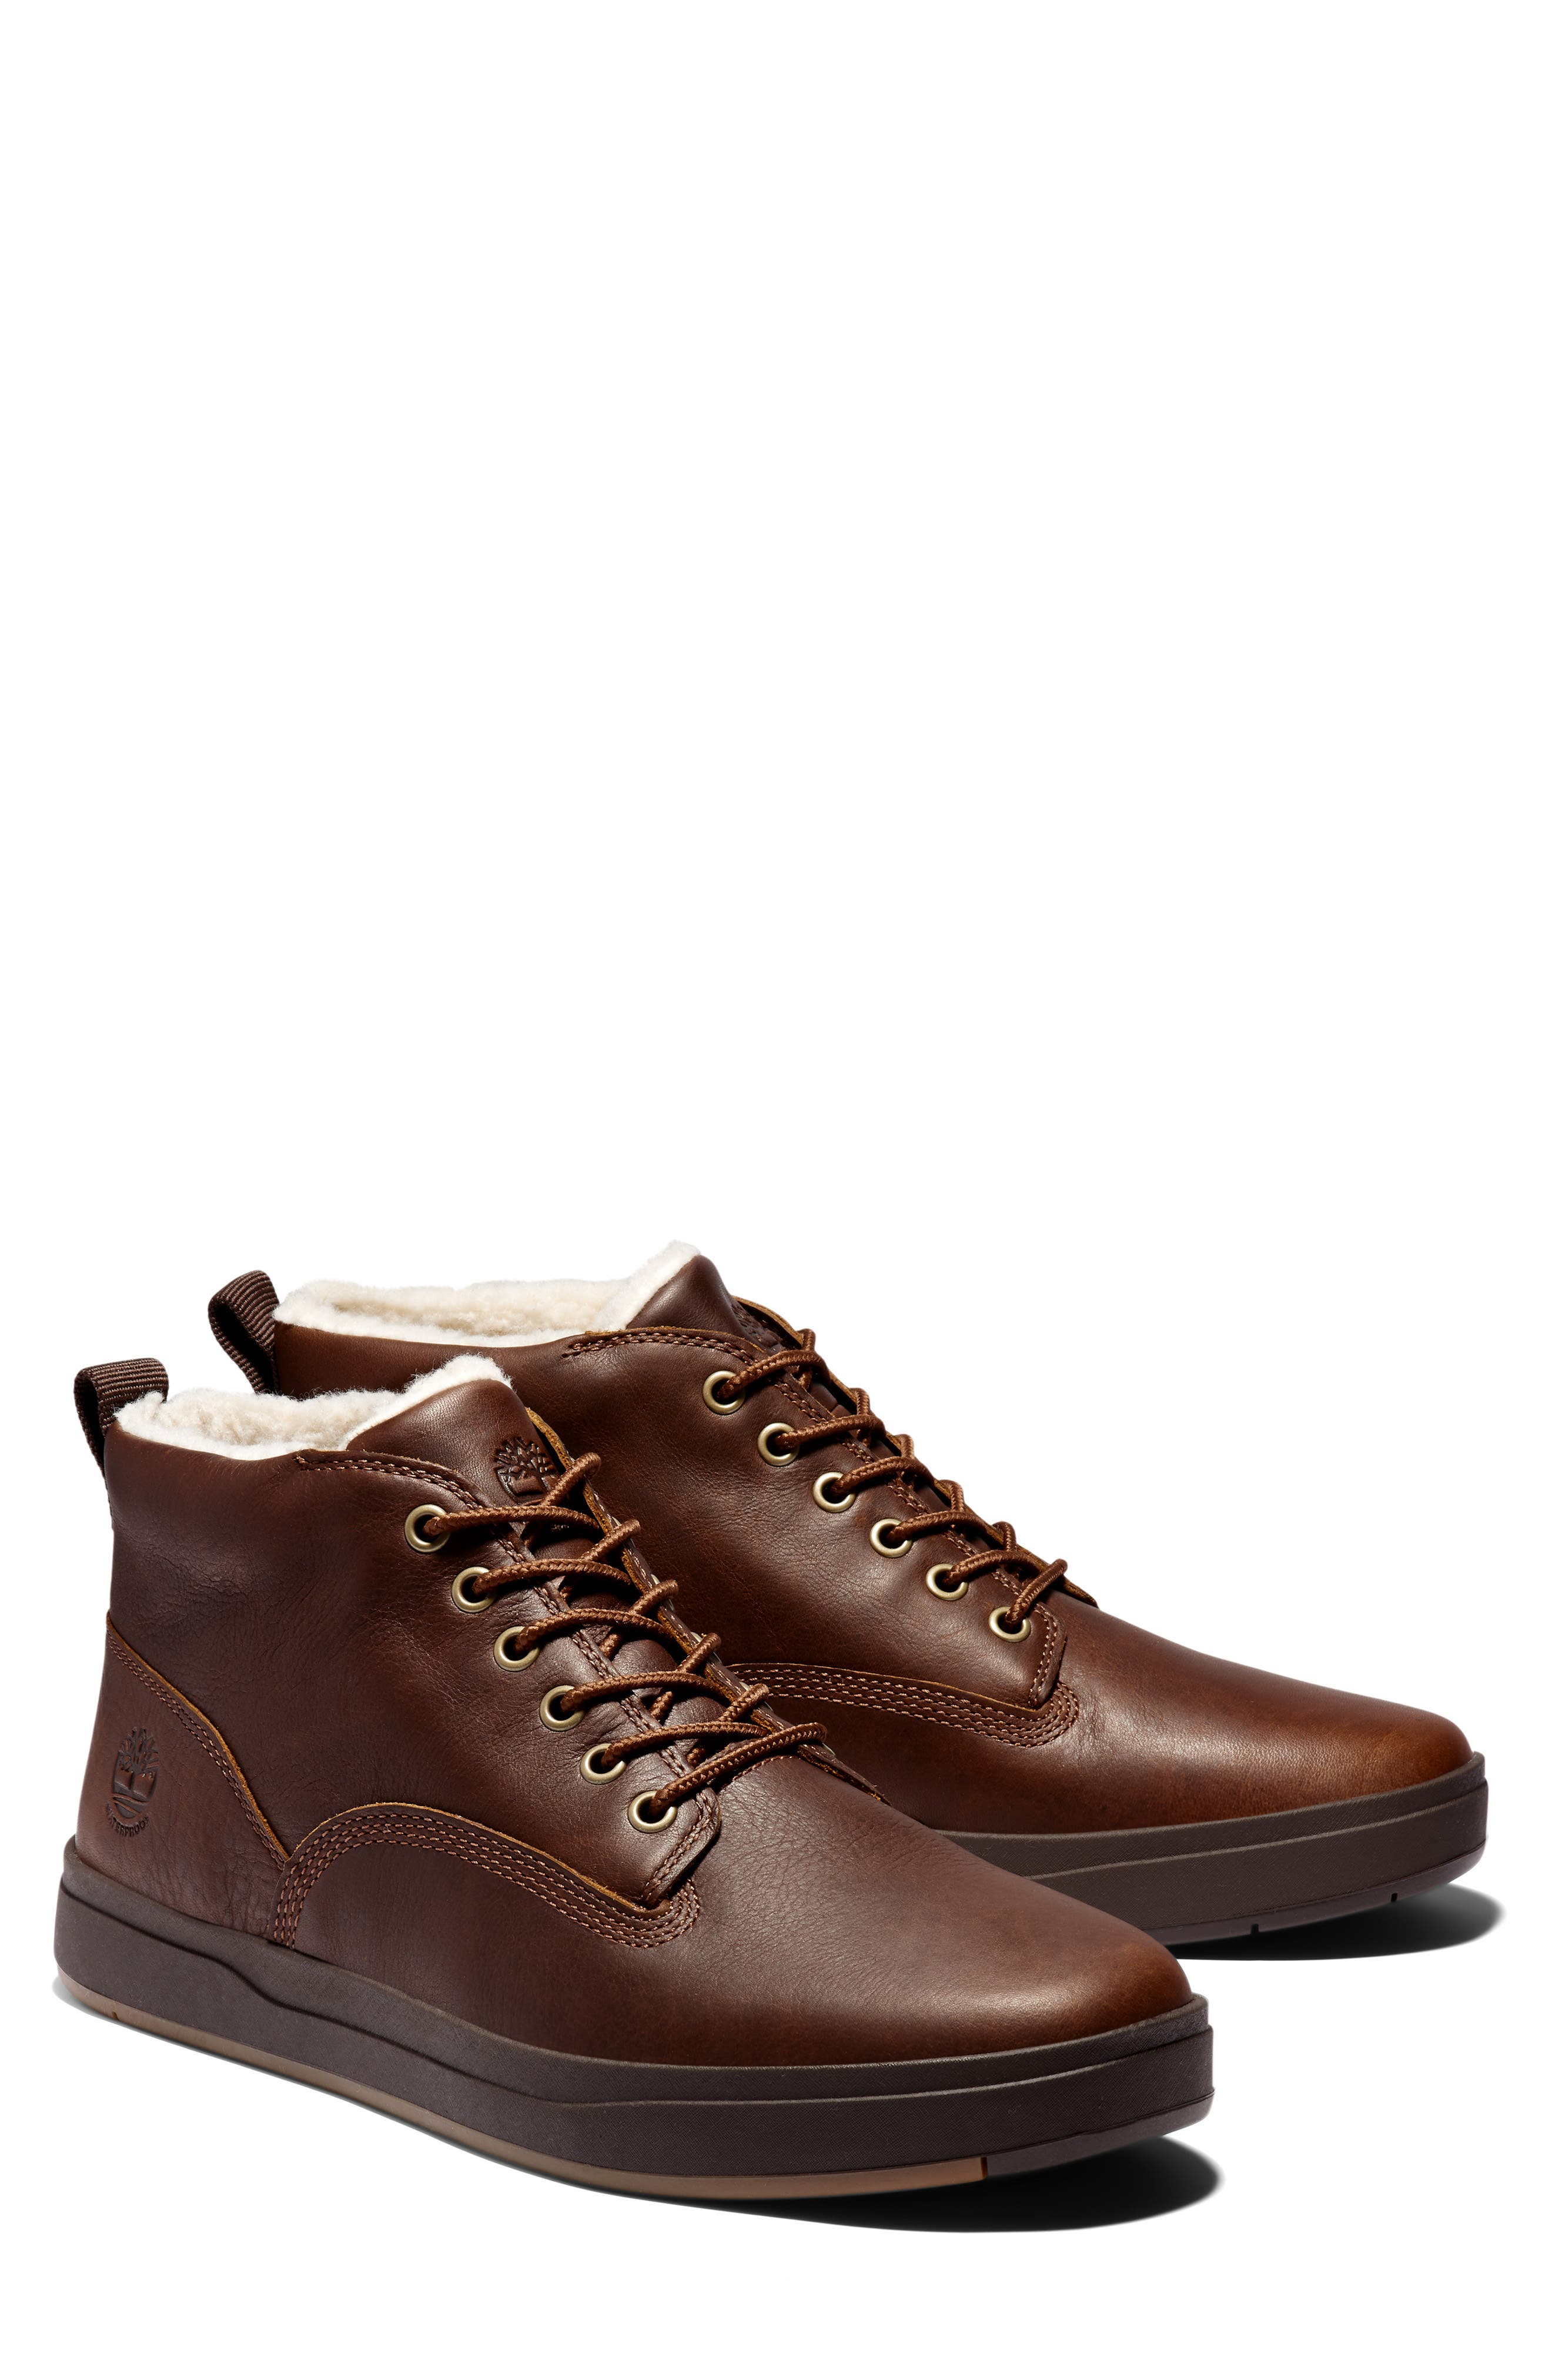 timberland casual dress shoes